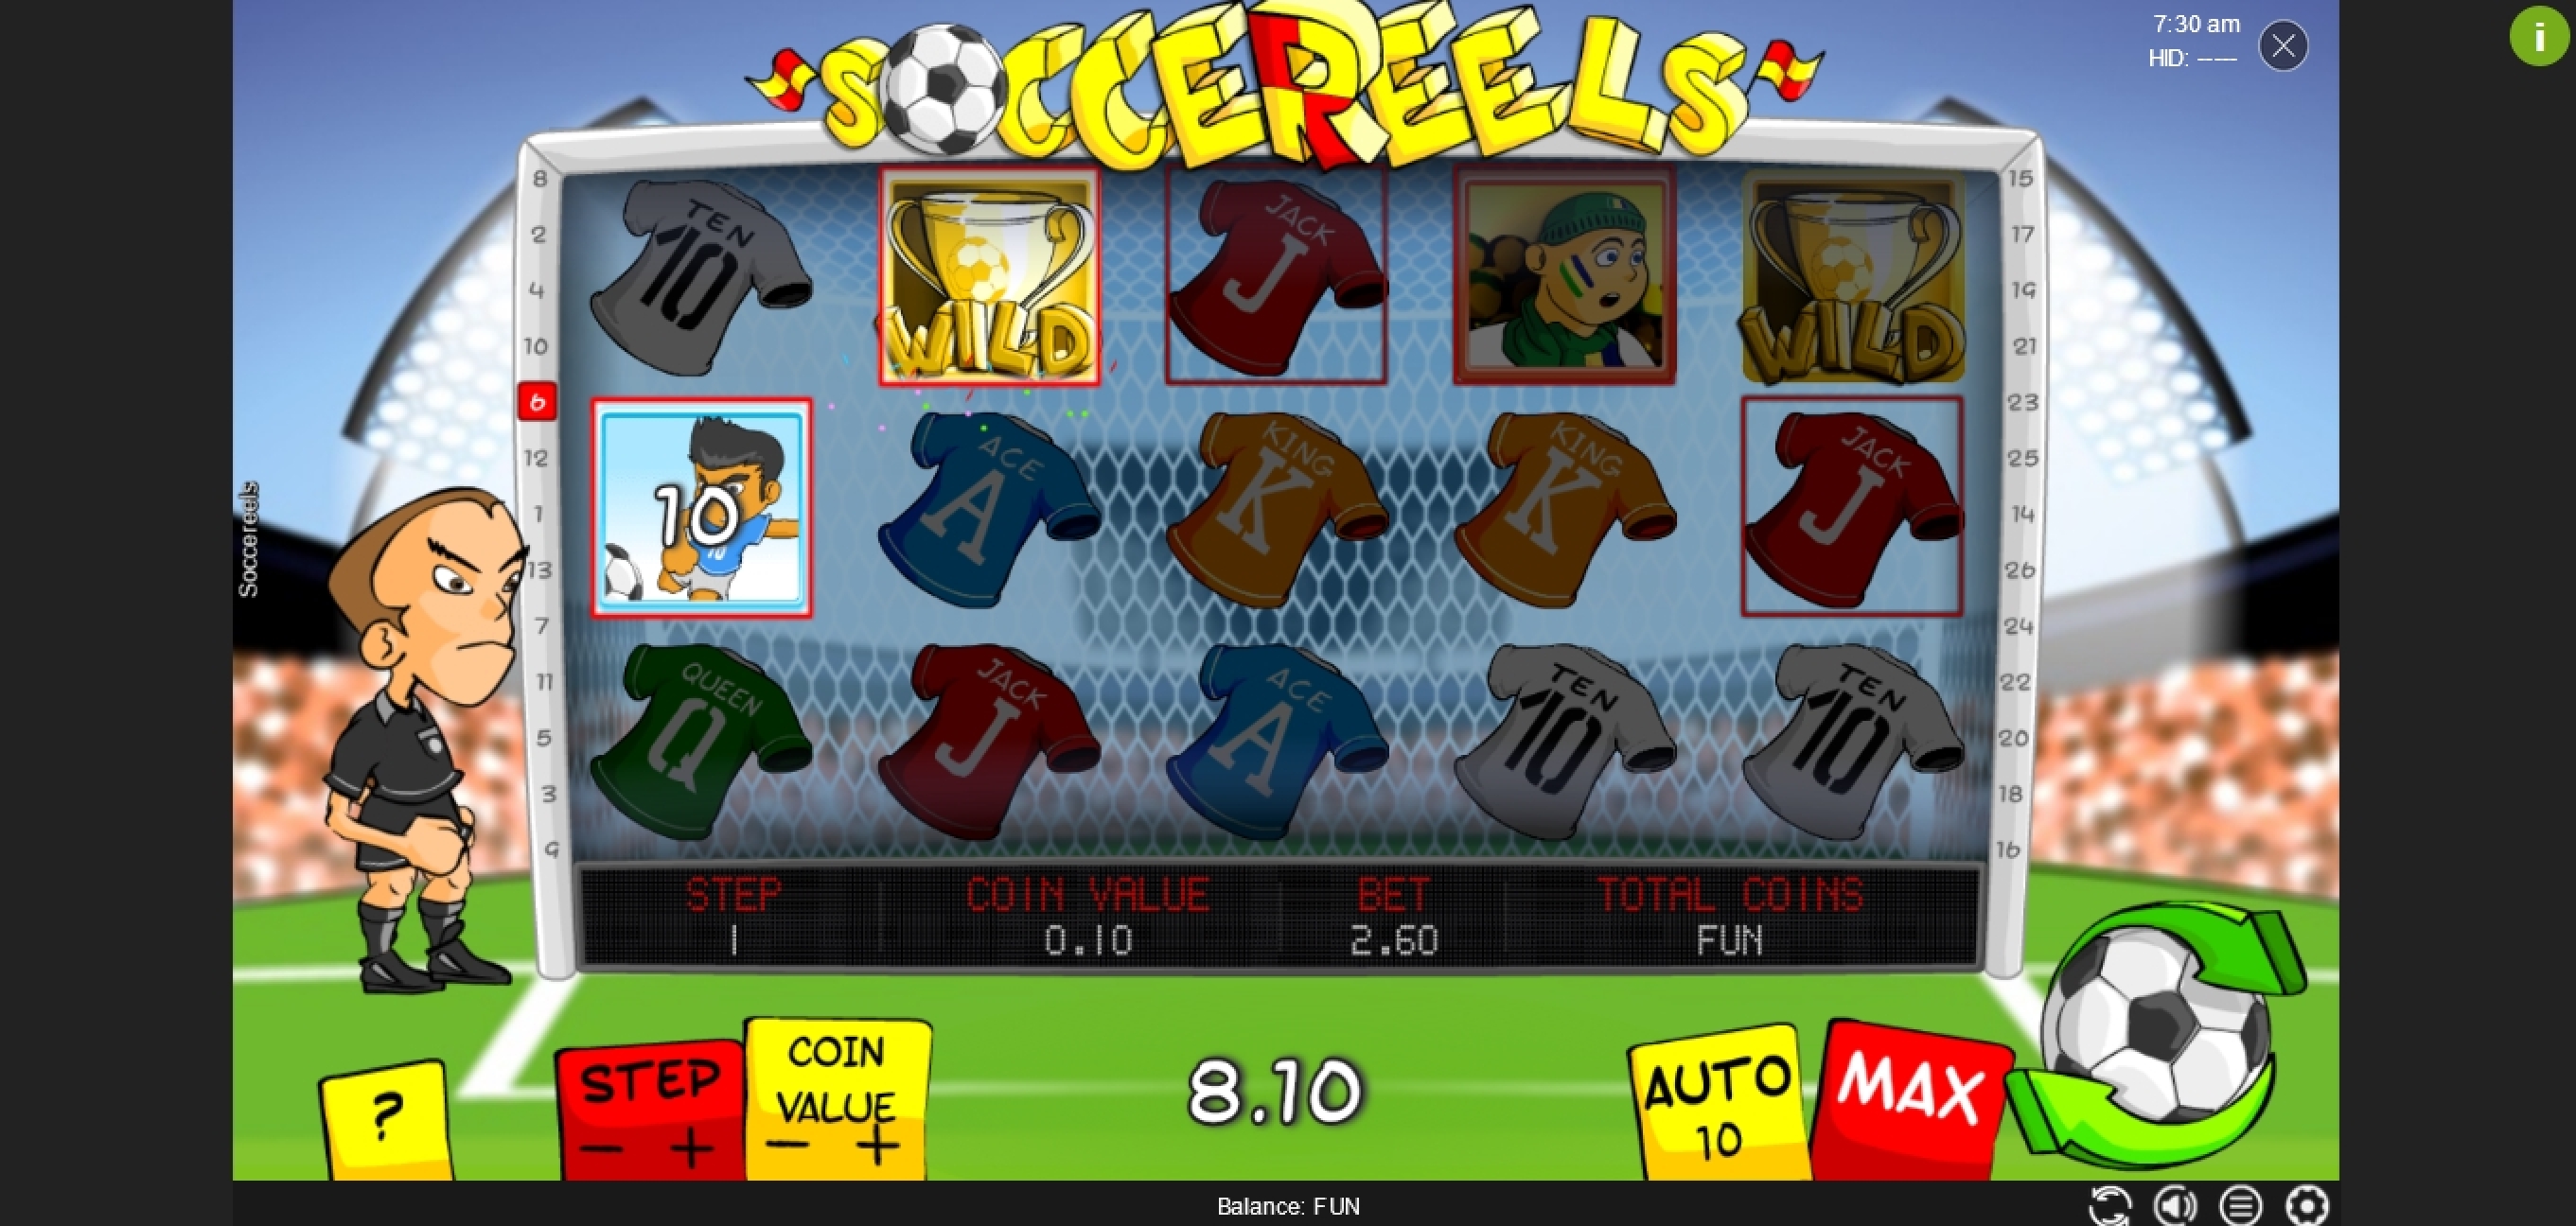 Win Money in Soccereels Free Slot Game by Espresso Games